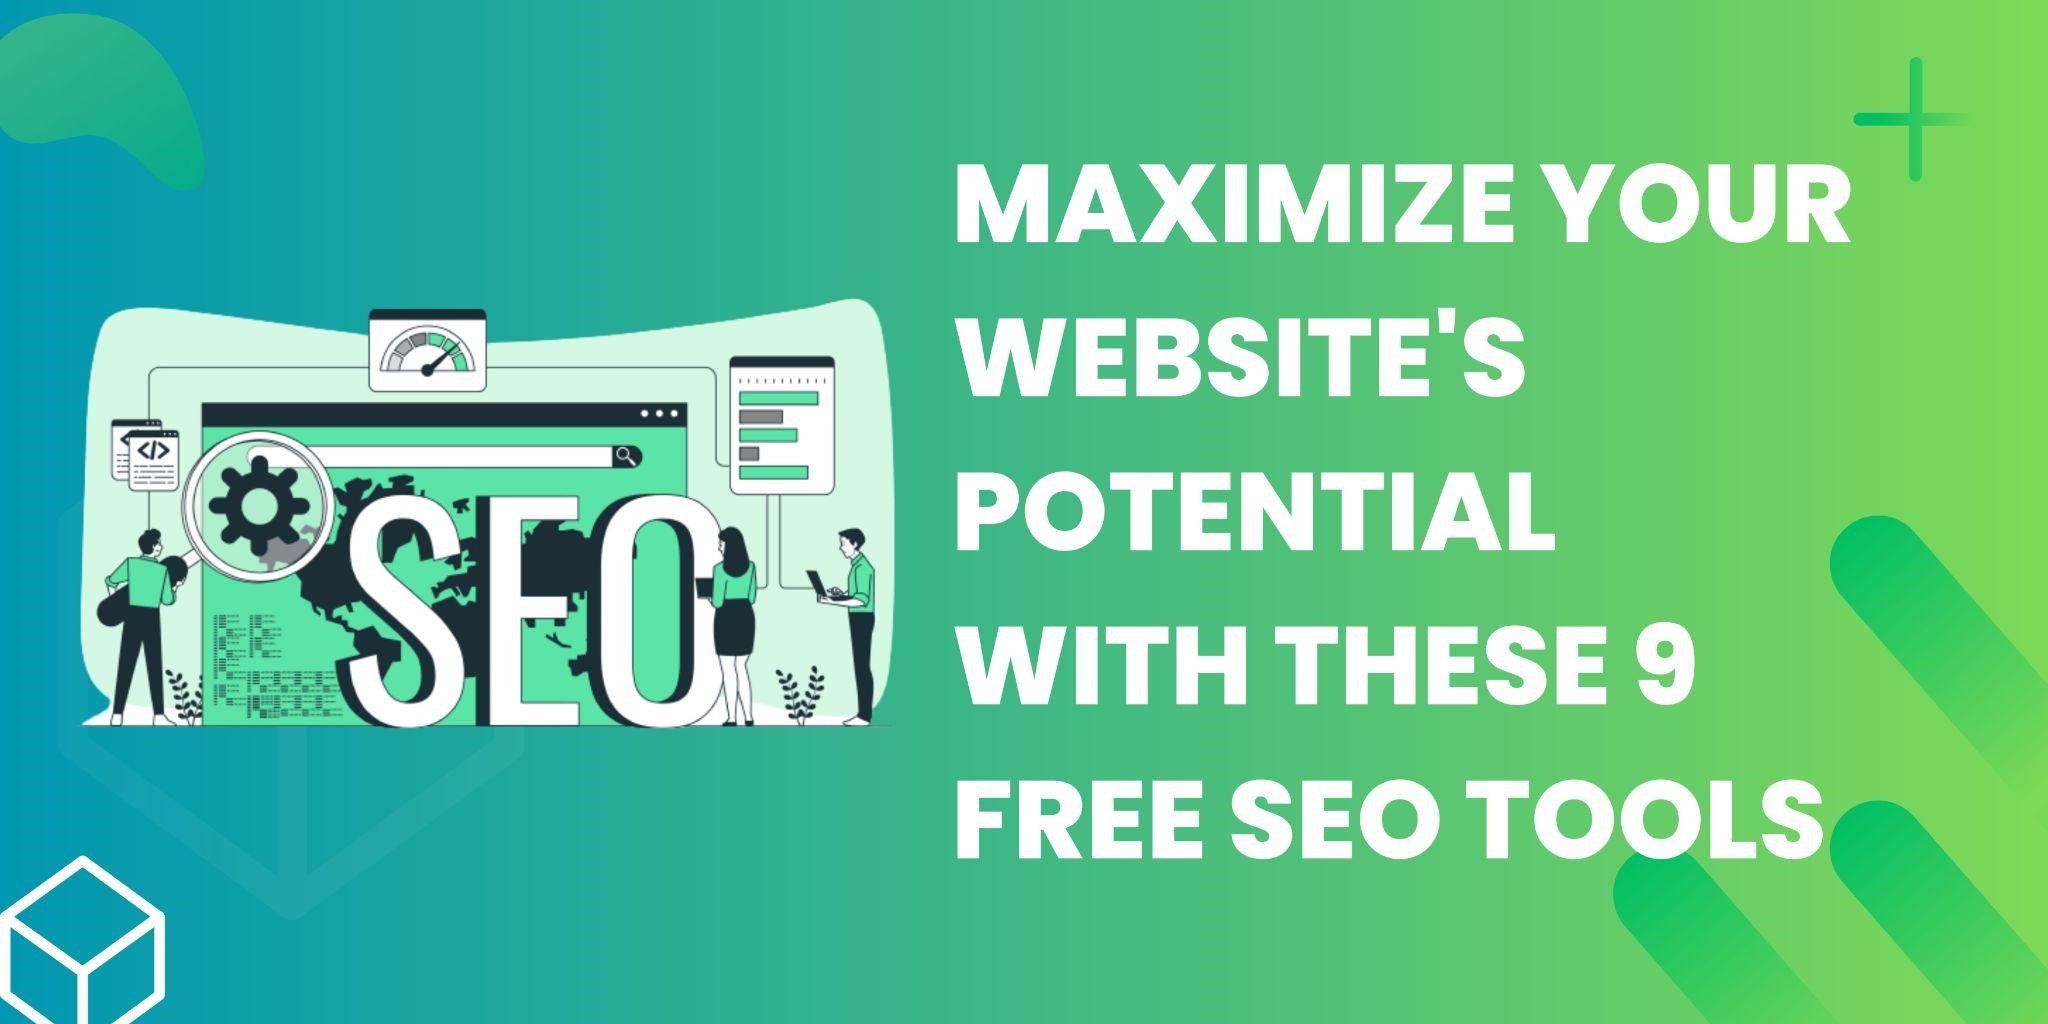 Maximize Your Website's Potential with These 9 Free SEO Tools